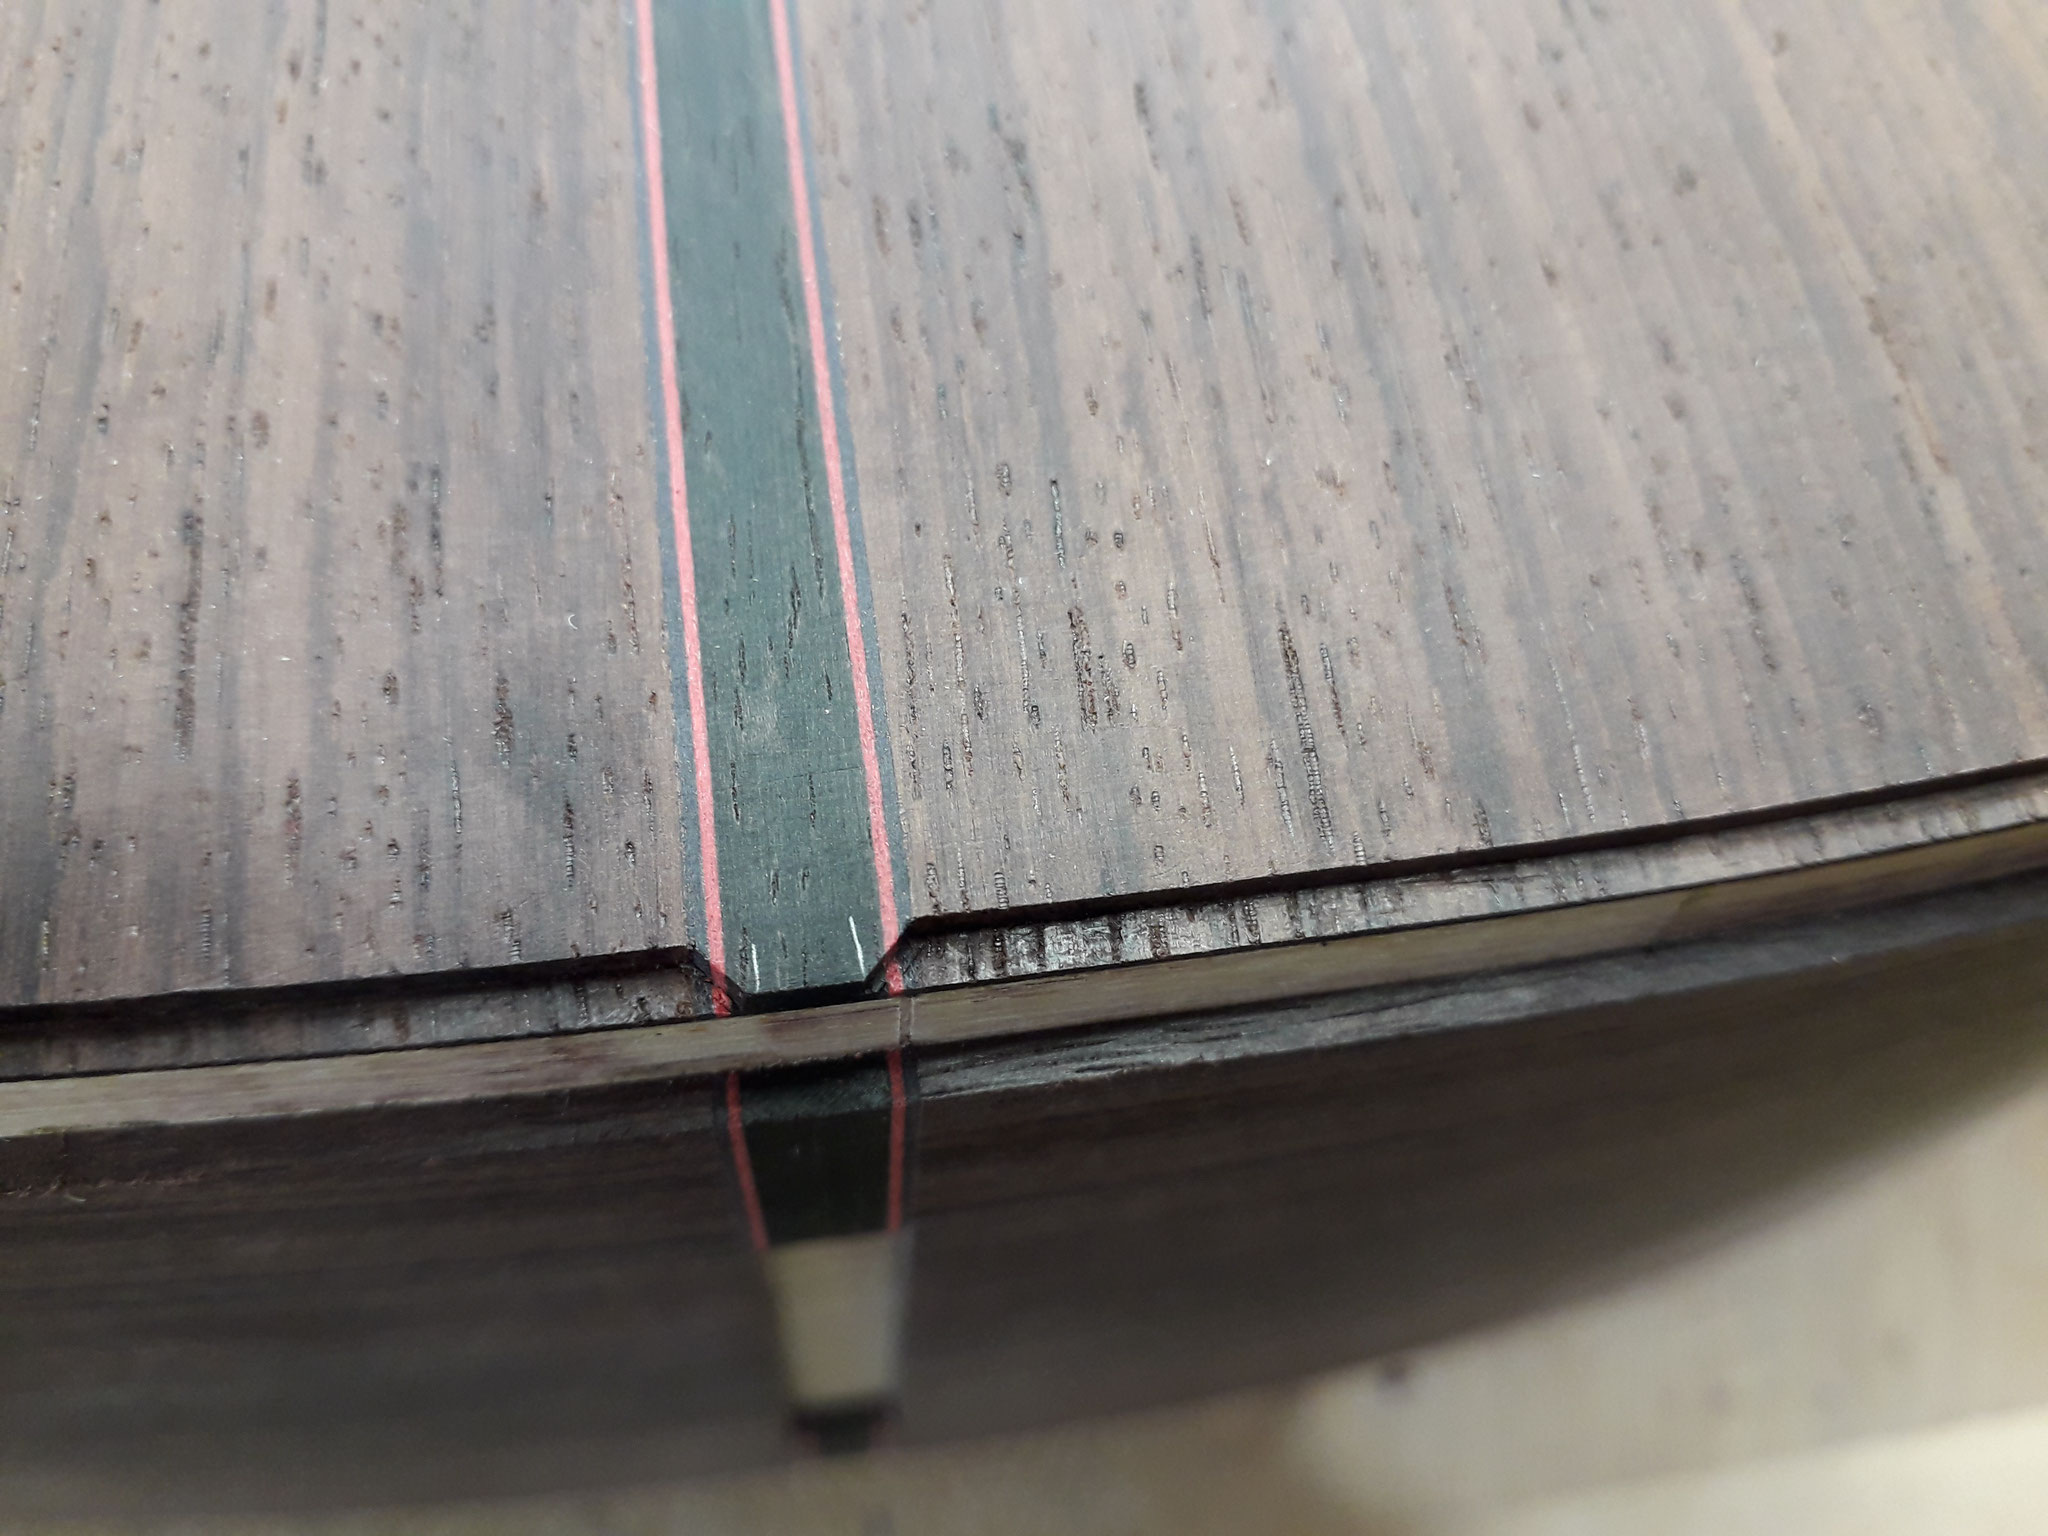 Detail of the preparation before fitting and gluing the back bindings of a guitar